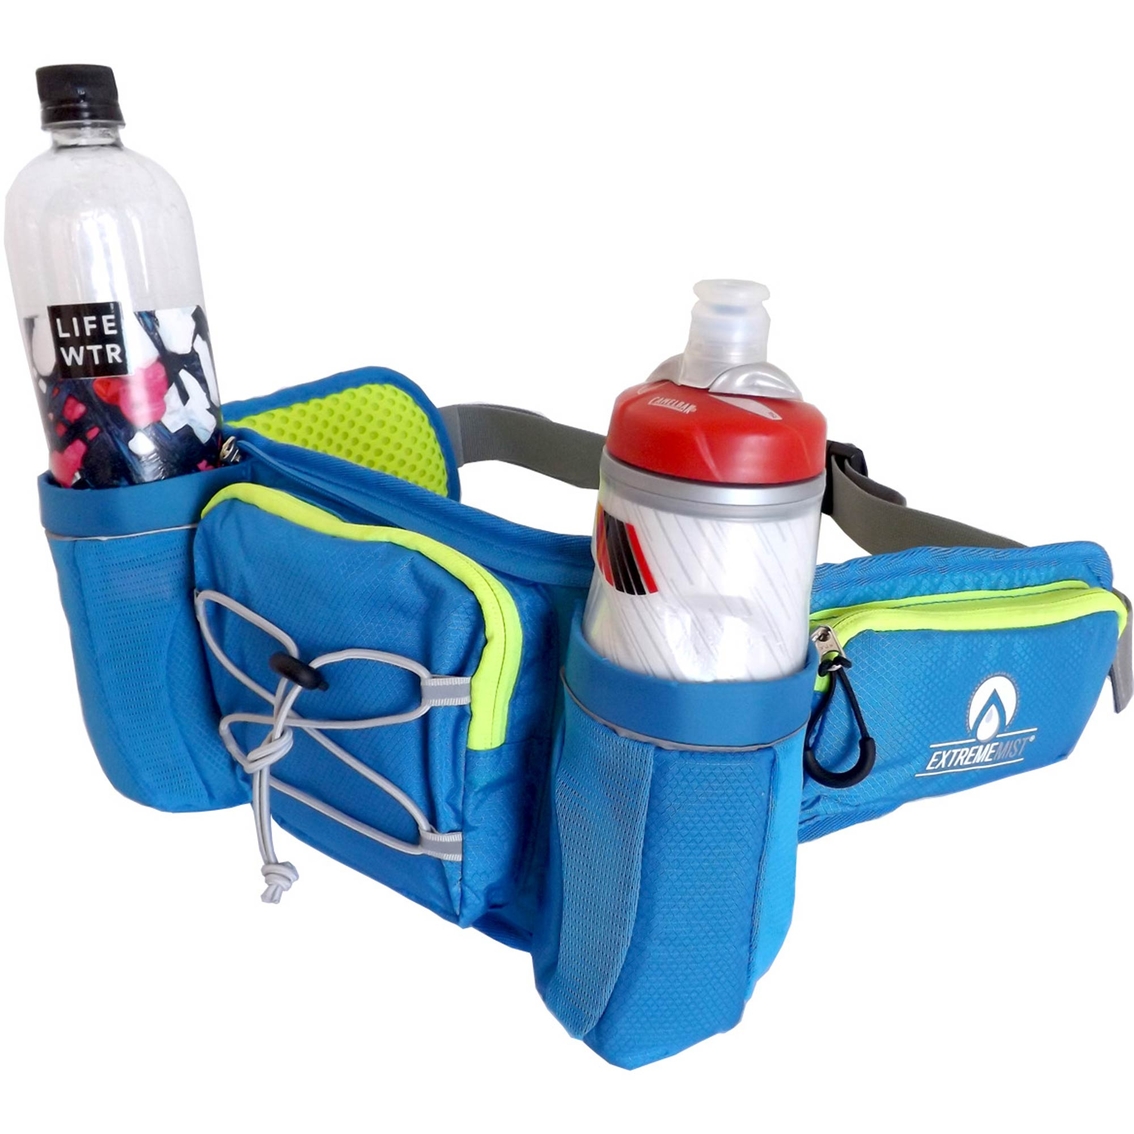 ExtremeMist Detachable Dual Holster Hydration Waist Pack - Image 3 of 5